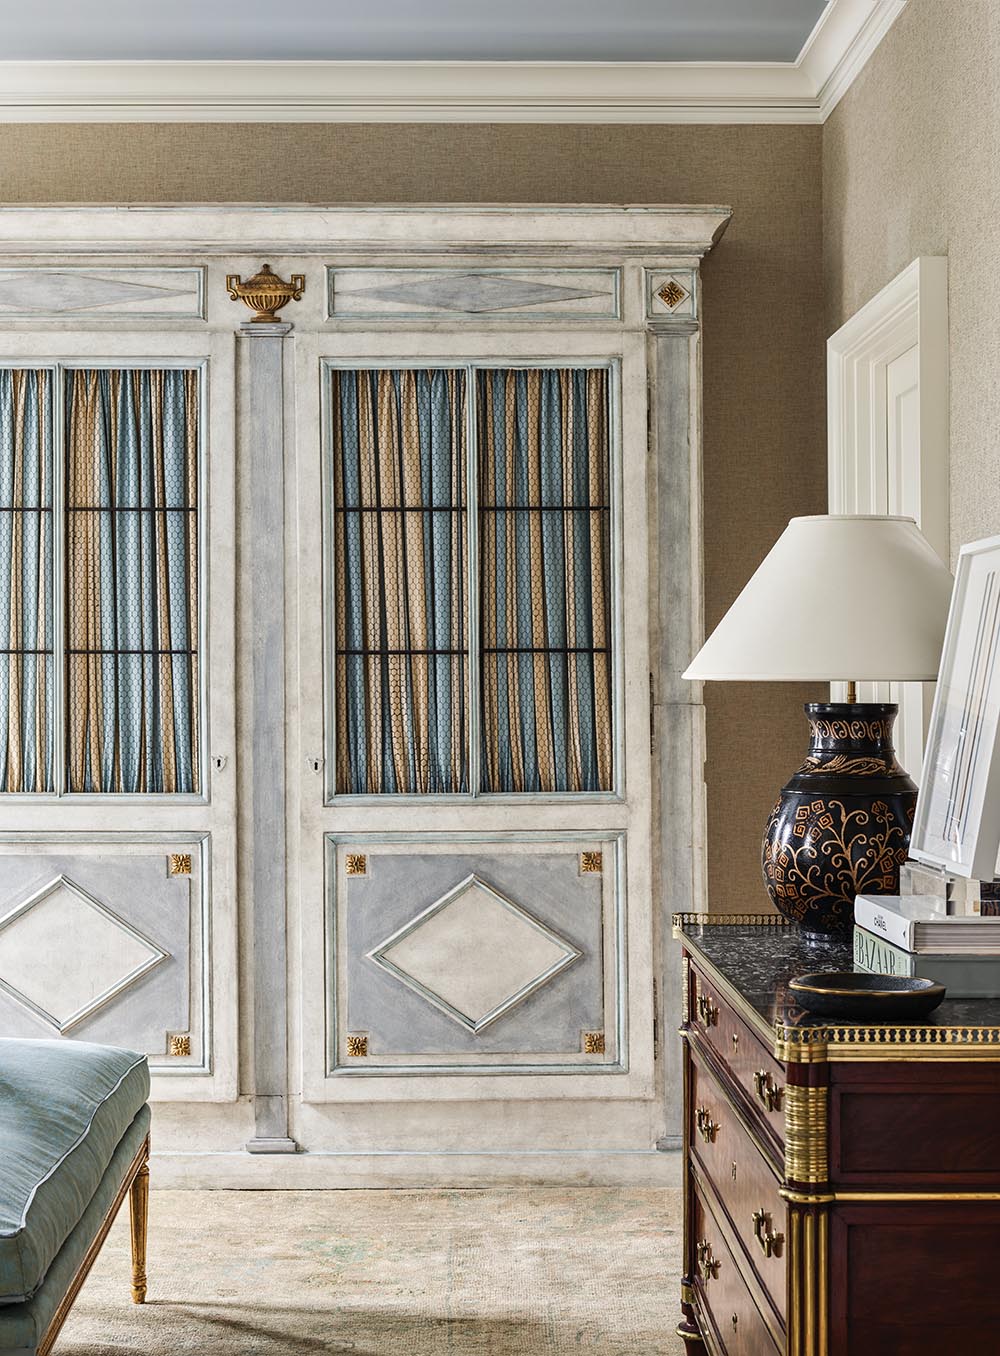 Large 19th-century cabinet that Tristan Harstan found in France to use in the second story bedroom he and Beth Webb designed for the Flower Showhouse